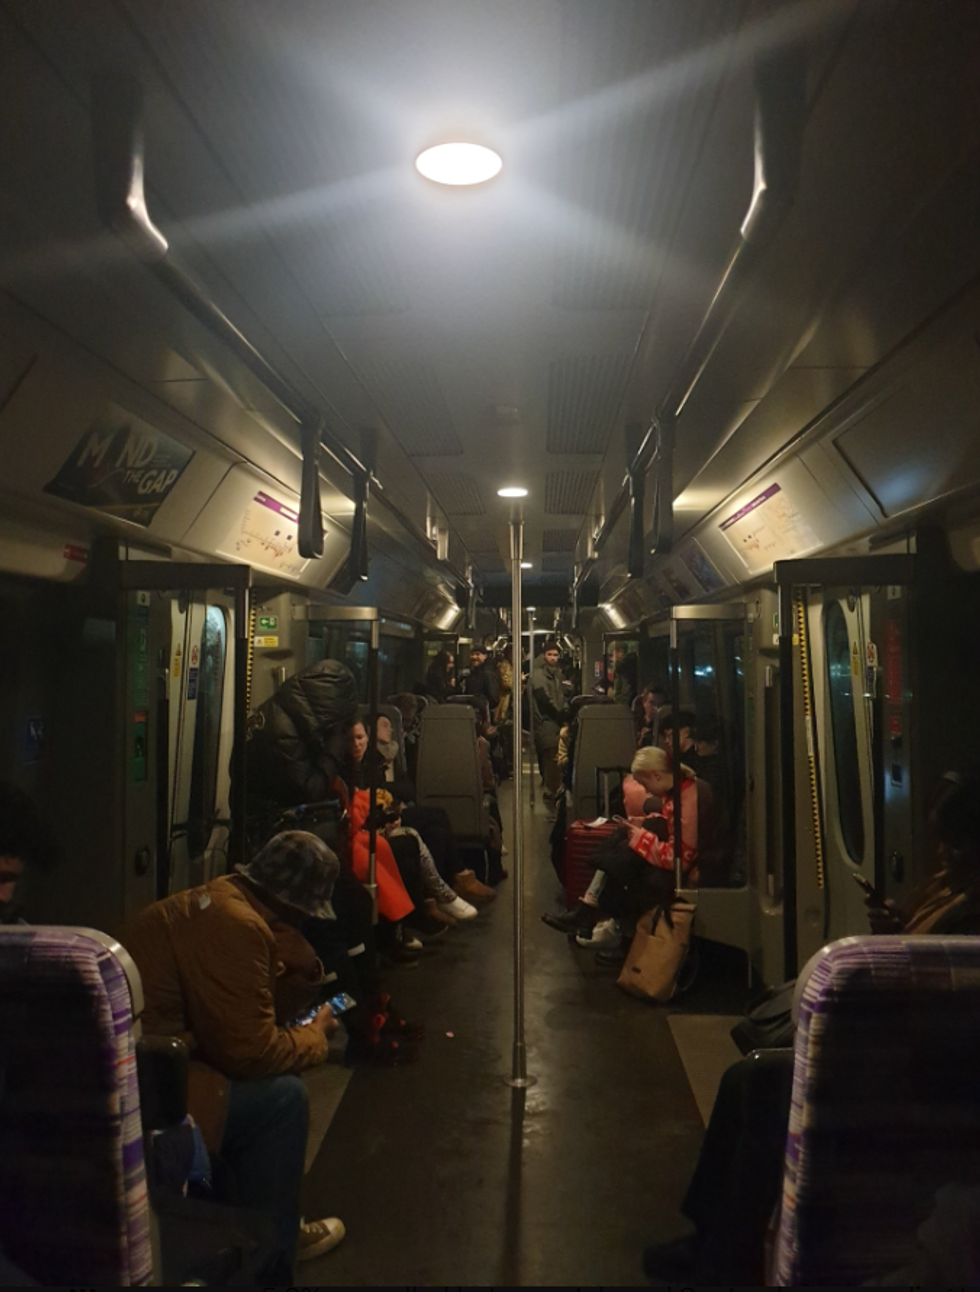 Passengers have been left in the dark with no power